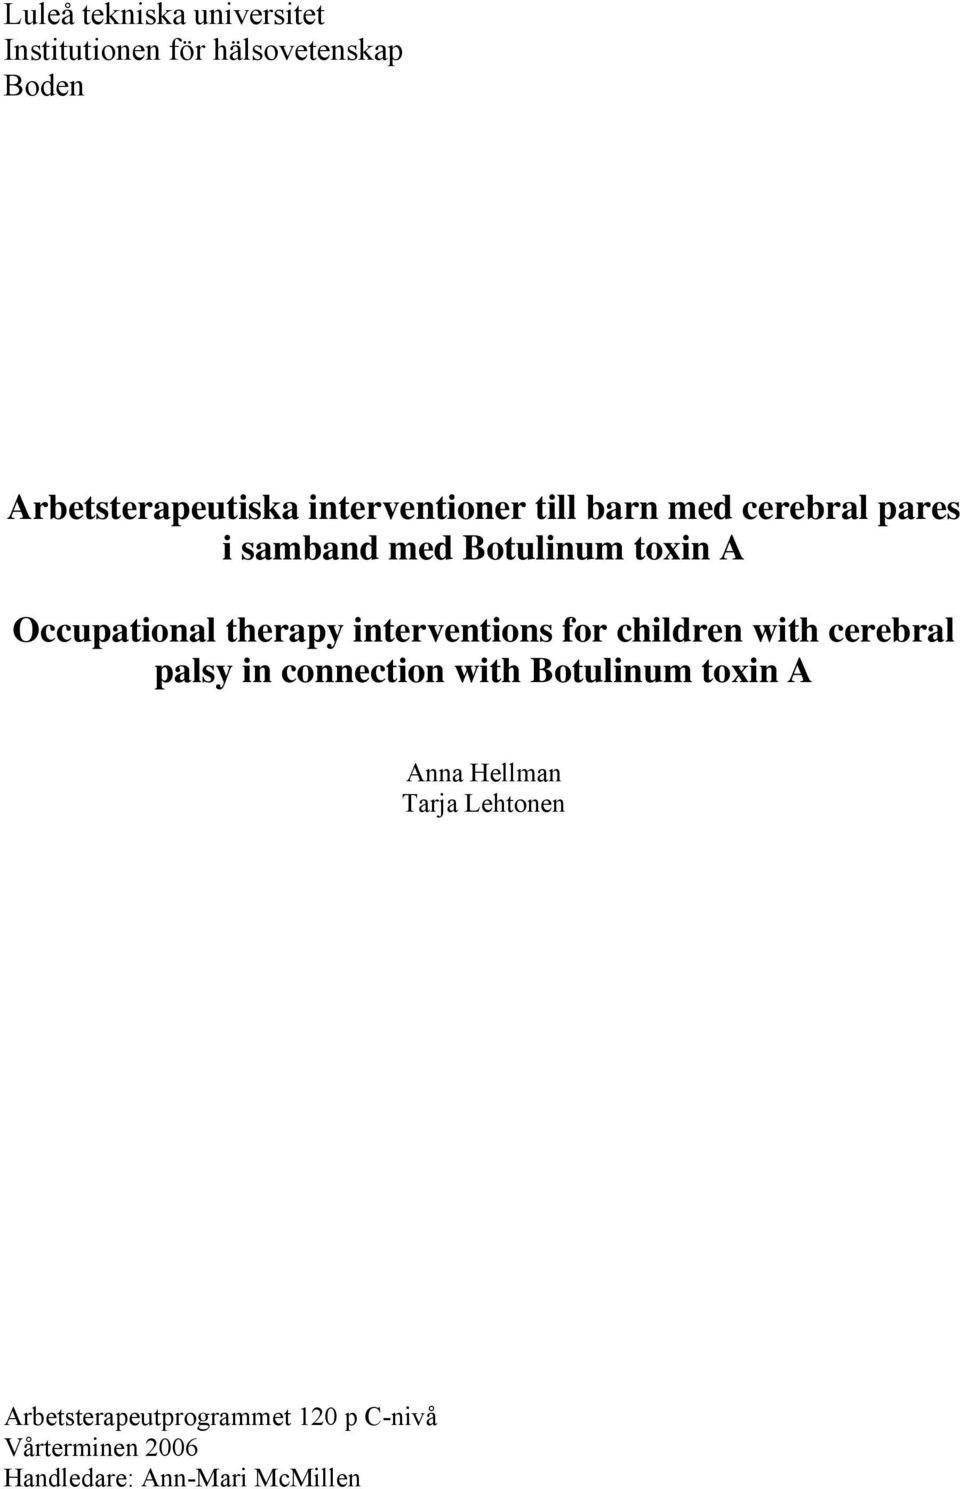 therapy interventions for children with cerebral palsy in connection with Botulinum toxin A